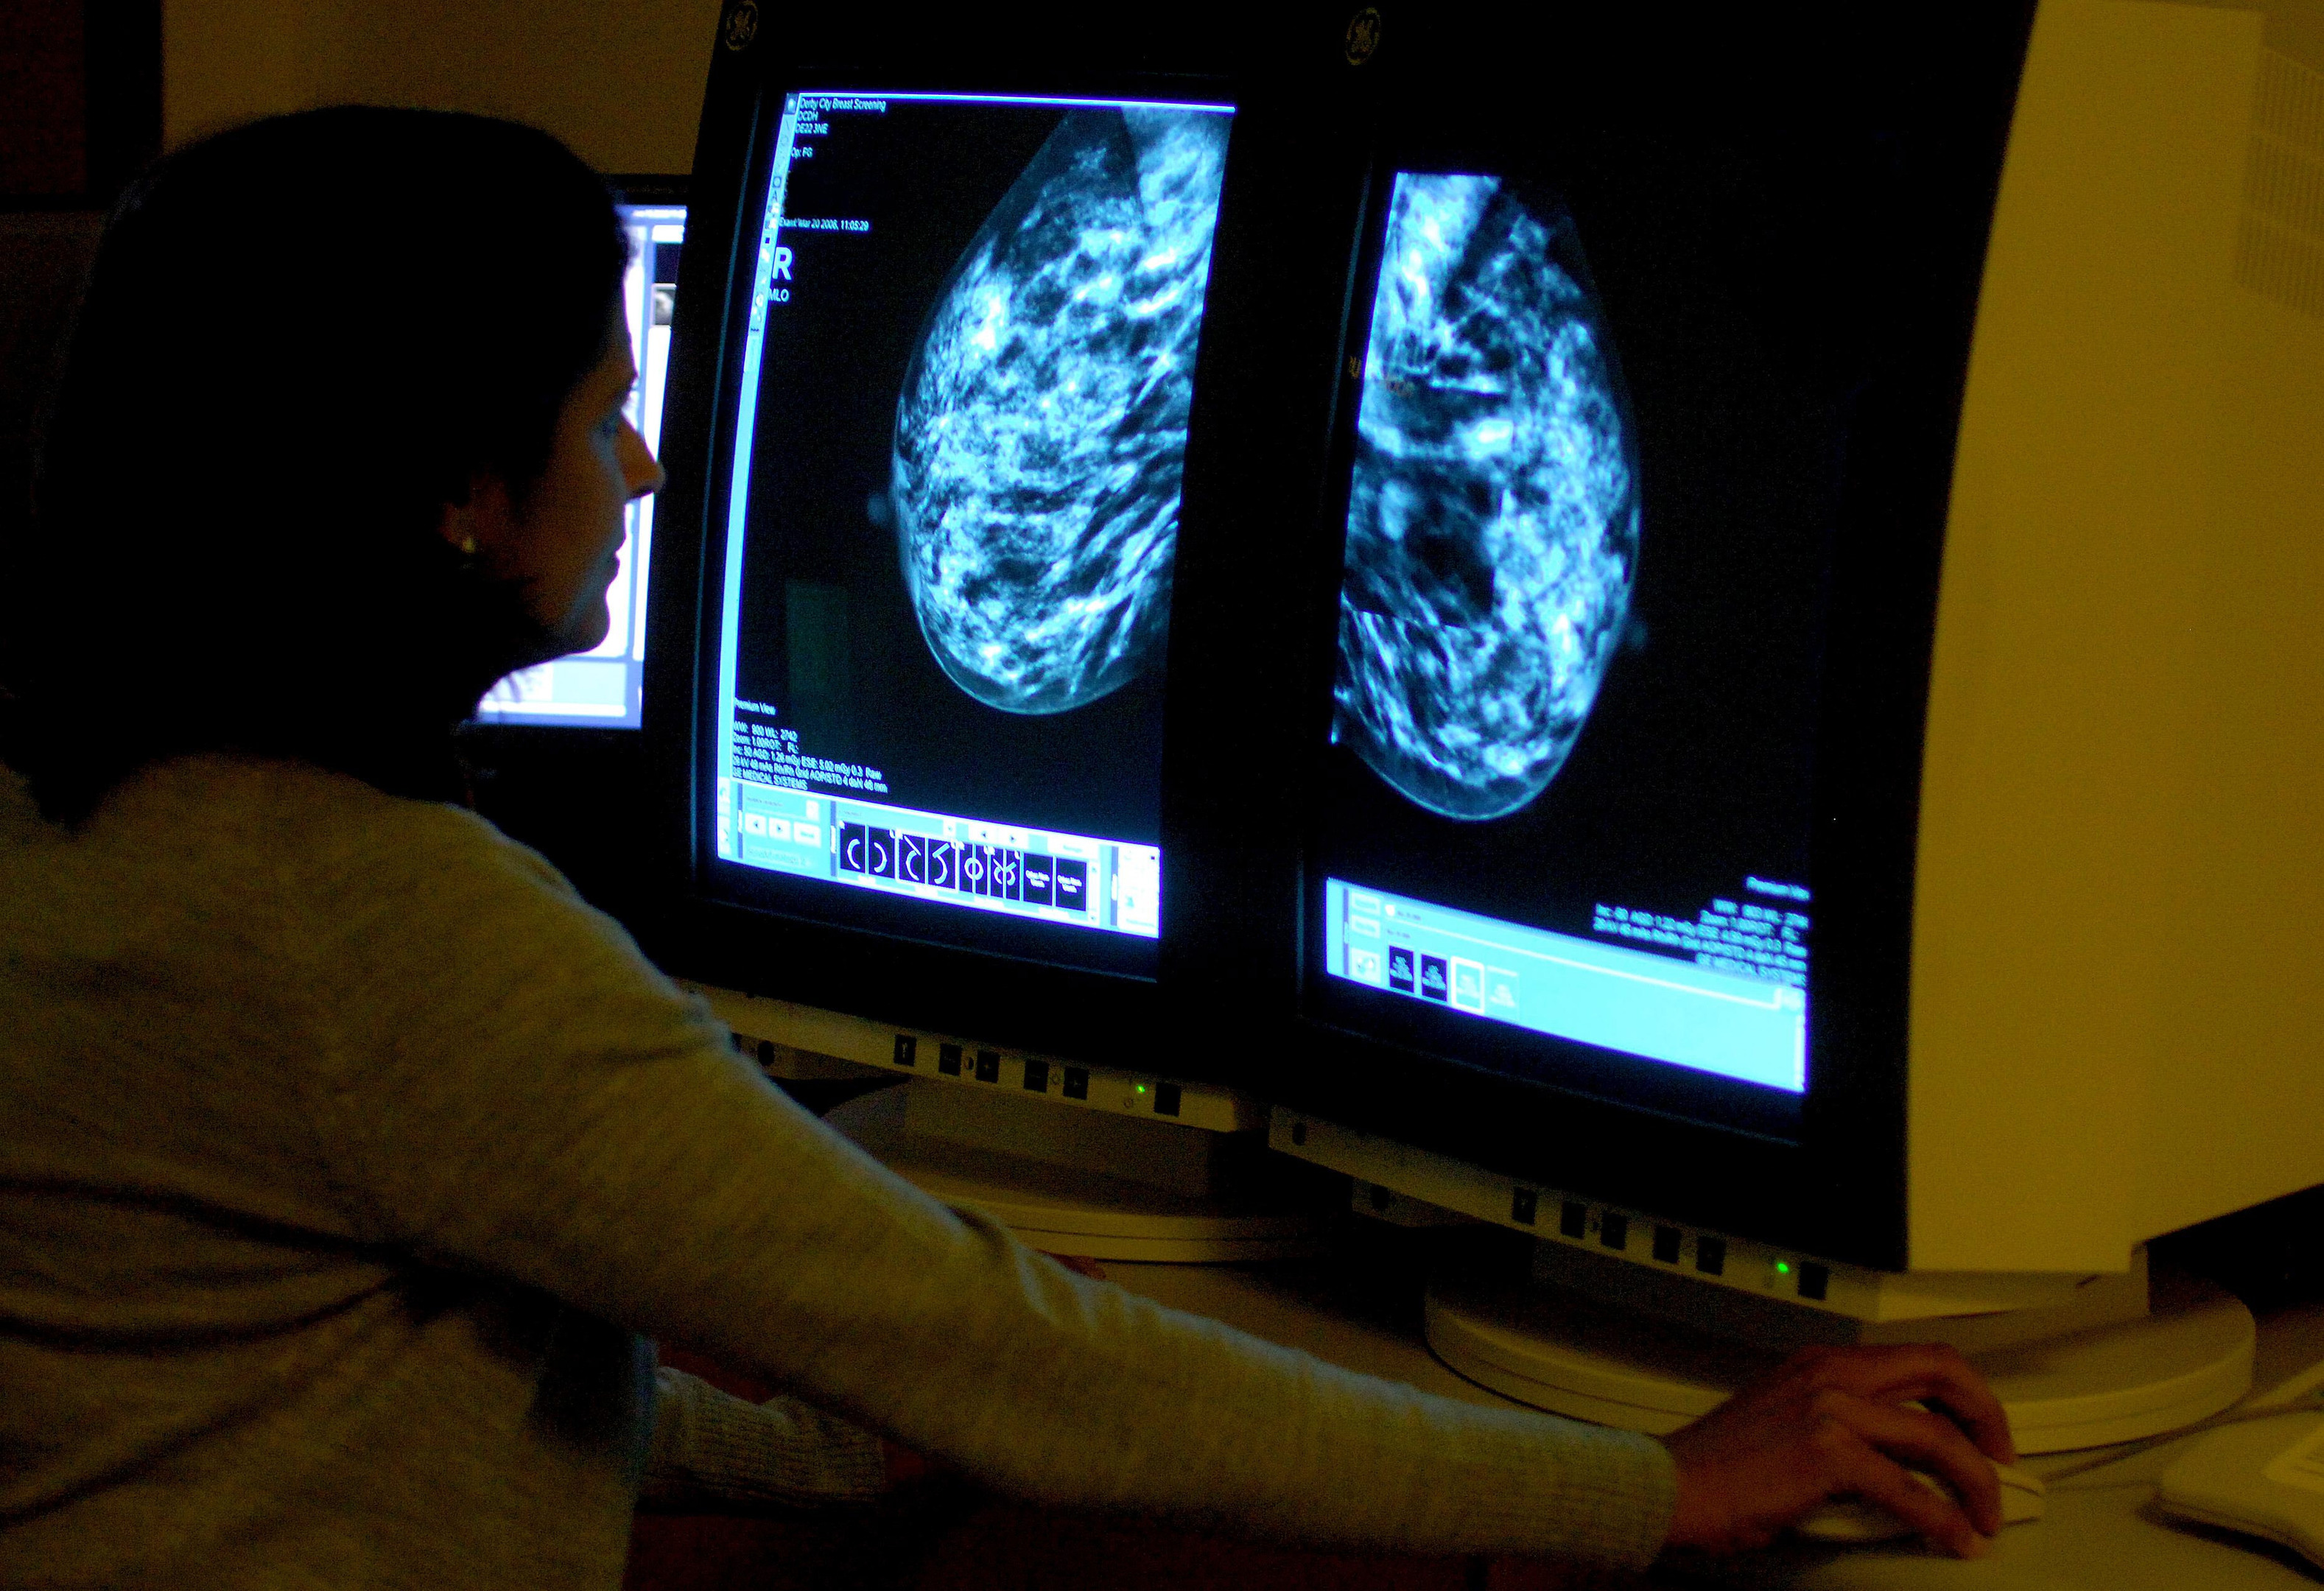 Analysis by Macmillan Cancer Support shows there were 361,216 cancers diagnosed in 2014 in the UK, the most recent figures available, compared to 289,841 marriages. (Rui Vieira/PA Wire)